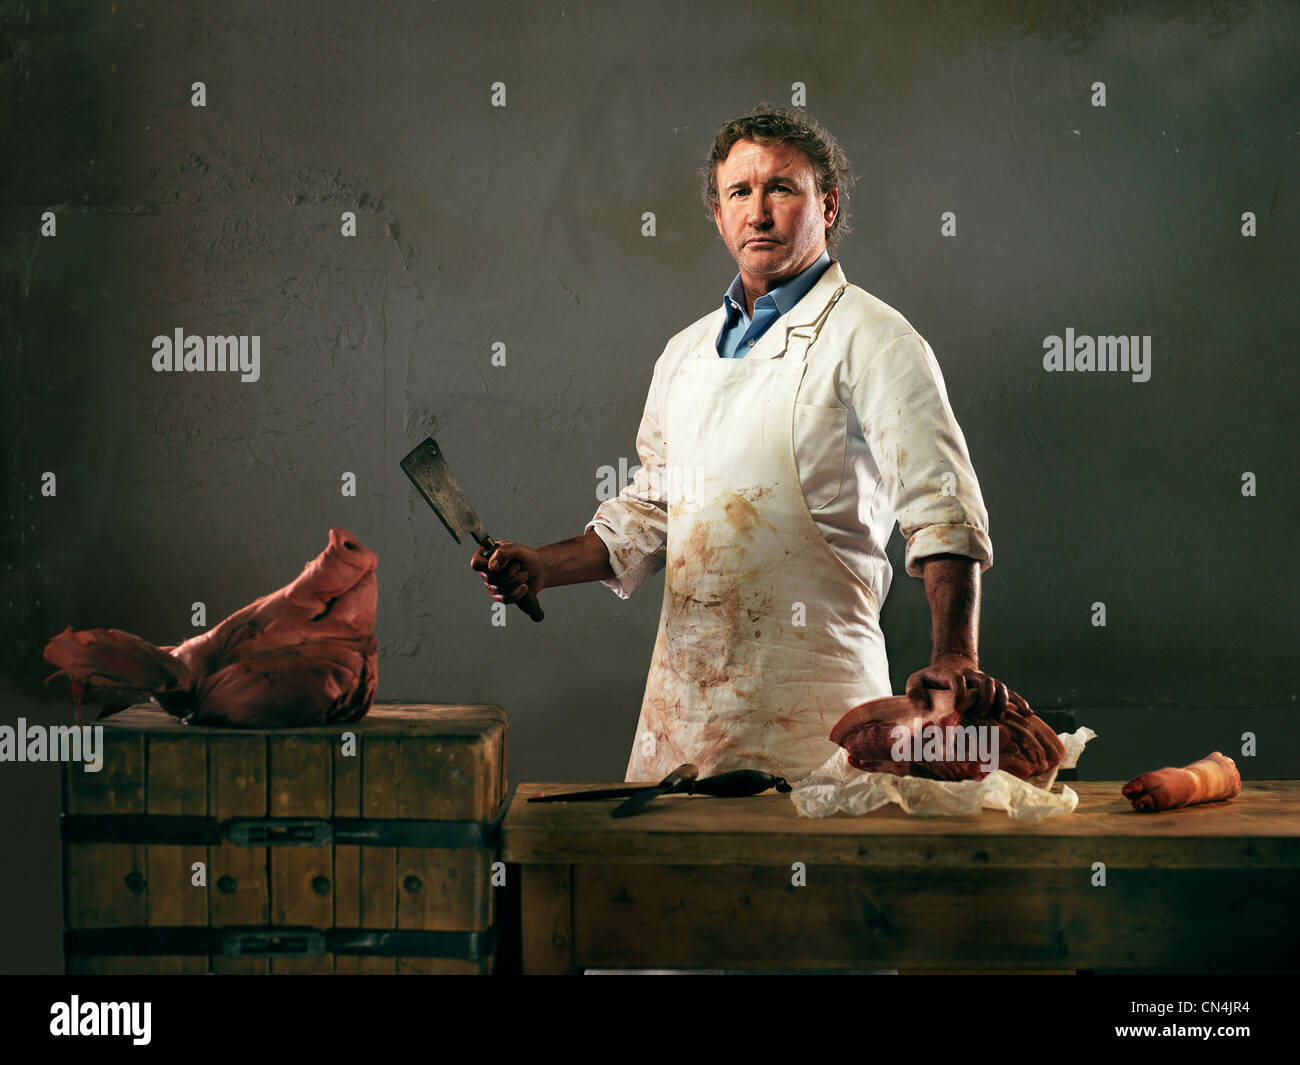 Butcher preparing meat from pig Stock Photo